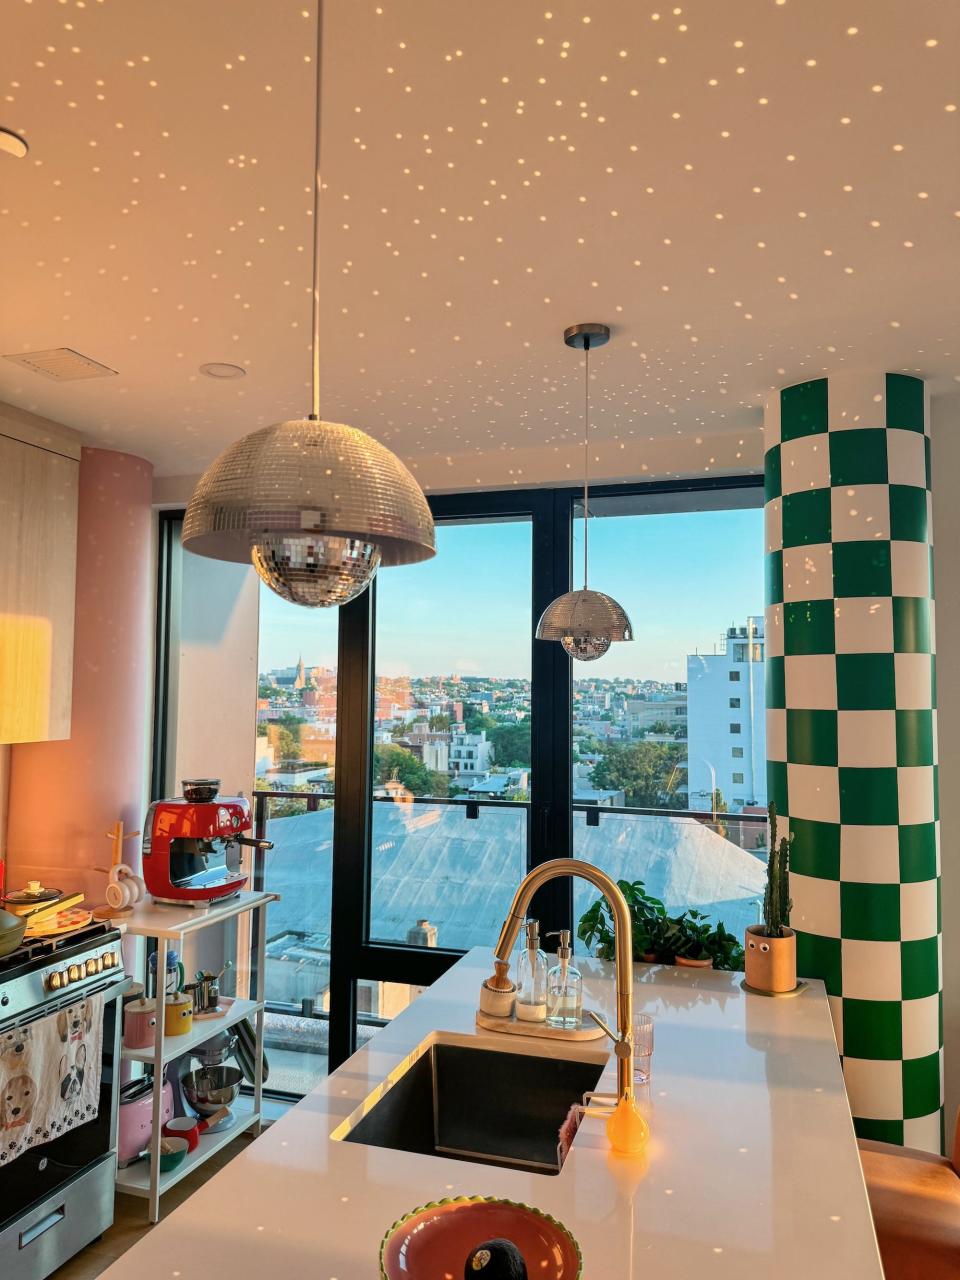 A kitchen with disco ball lights hanging from the ceiling. A pillar nearby is painted checked green and white.